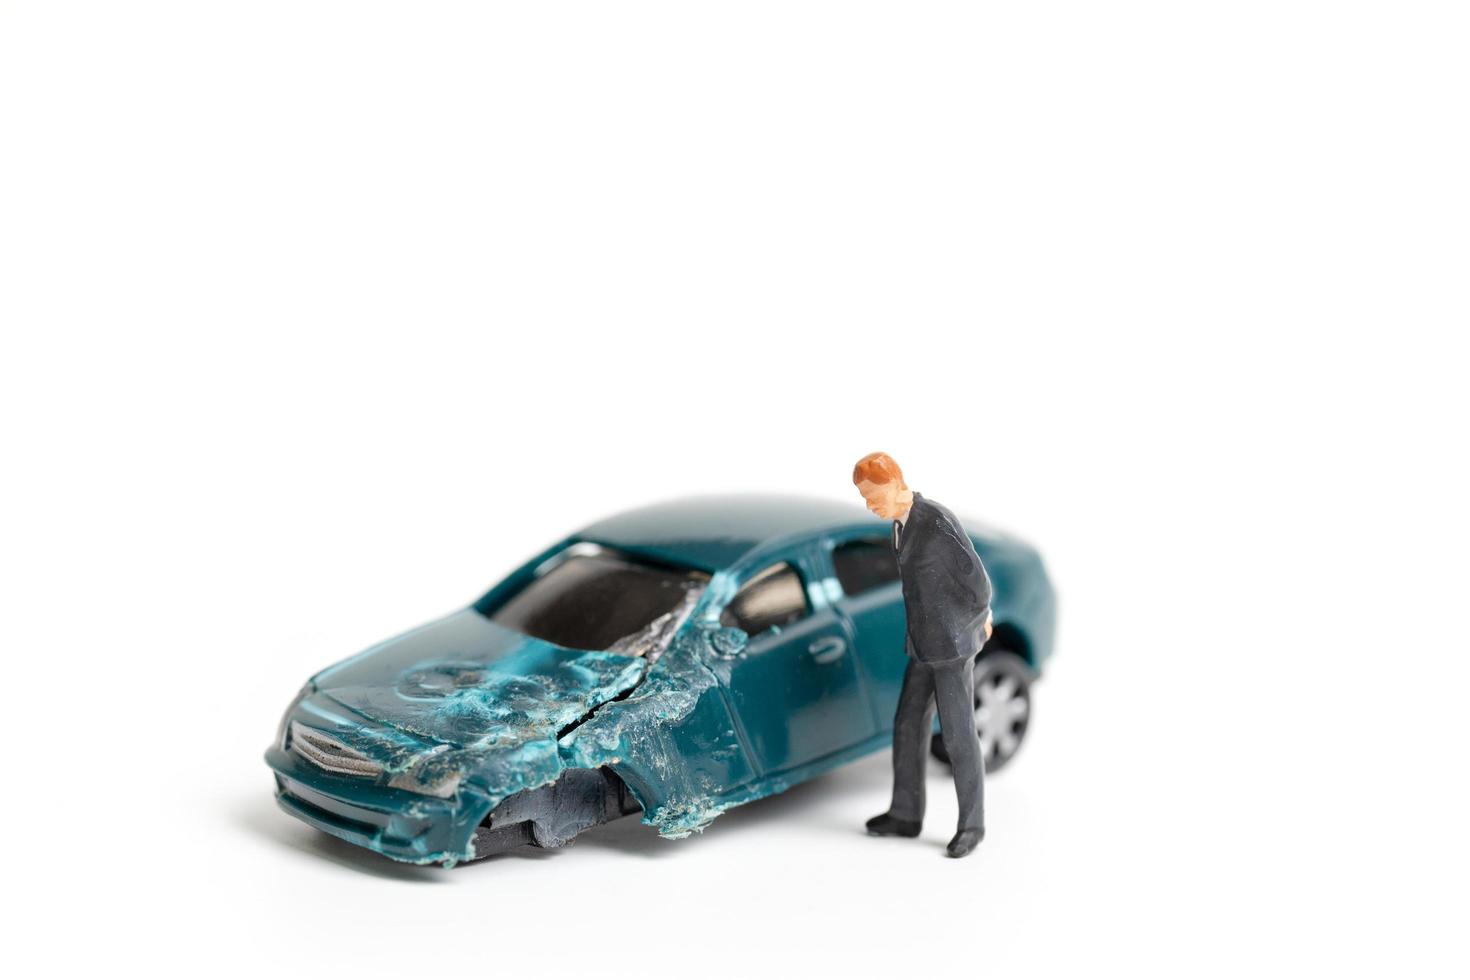 Miniature person at the scene of a car accident, car crash on a white background, drive safely concept photo